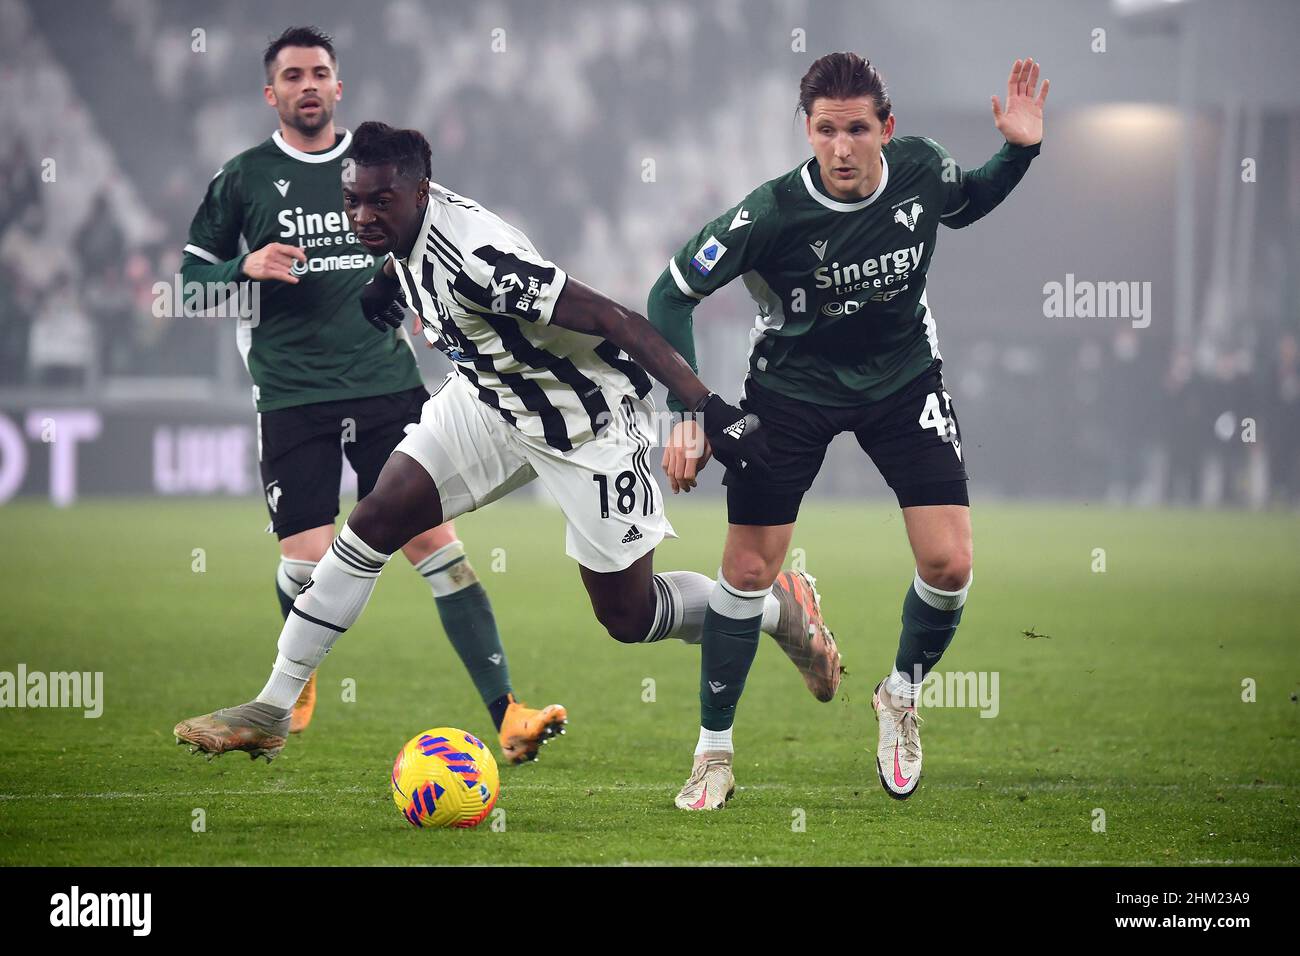 Torino, Italy. 06th Feb, 2022. Moise Kean of Juventus FC and Panagiotis Retsos of Hellas Verona compete for the ball during the Serie A 2021/2022 football match between Juventus FC and Hellas Verona at Juventus stadium in Torino (Italy), February 6th, 2022. Photo Federico Tardito/Insidefoto Credit: insidefoto srl/Alamy Live News Stock Photo